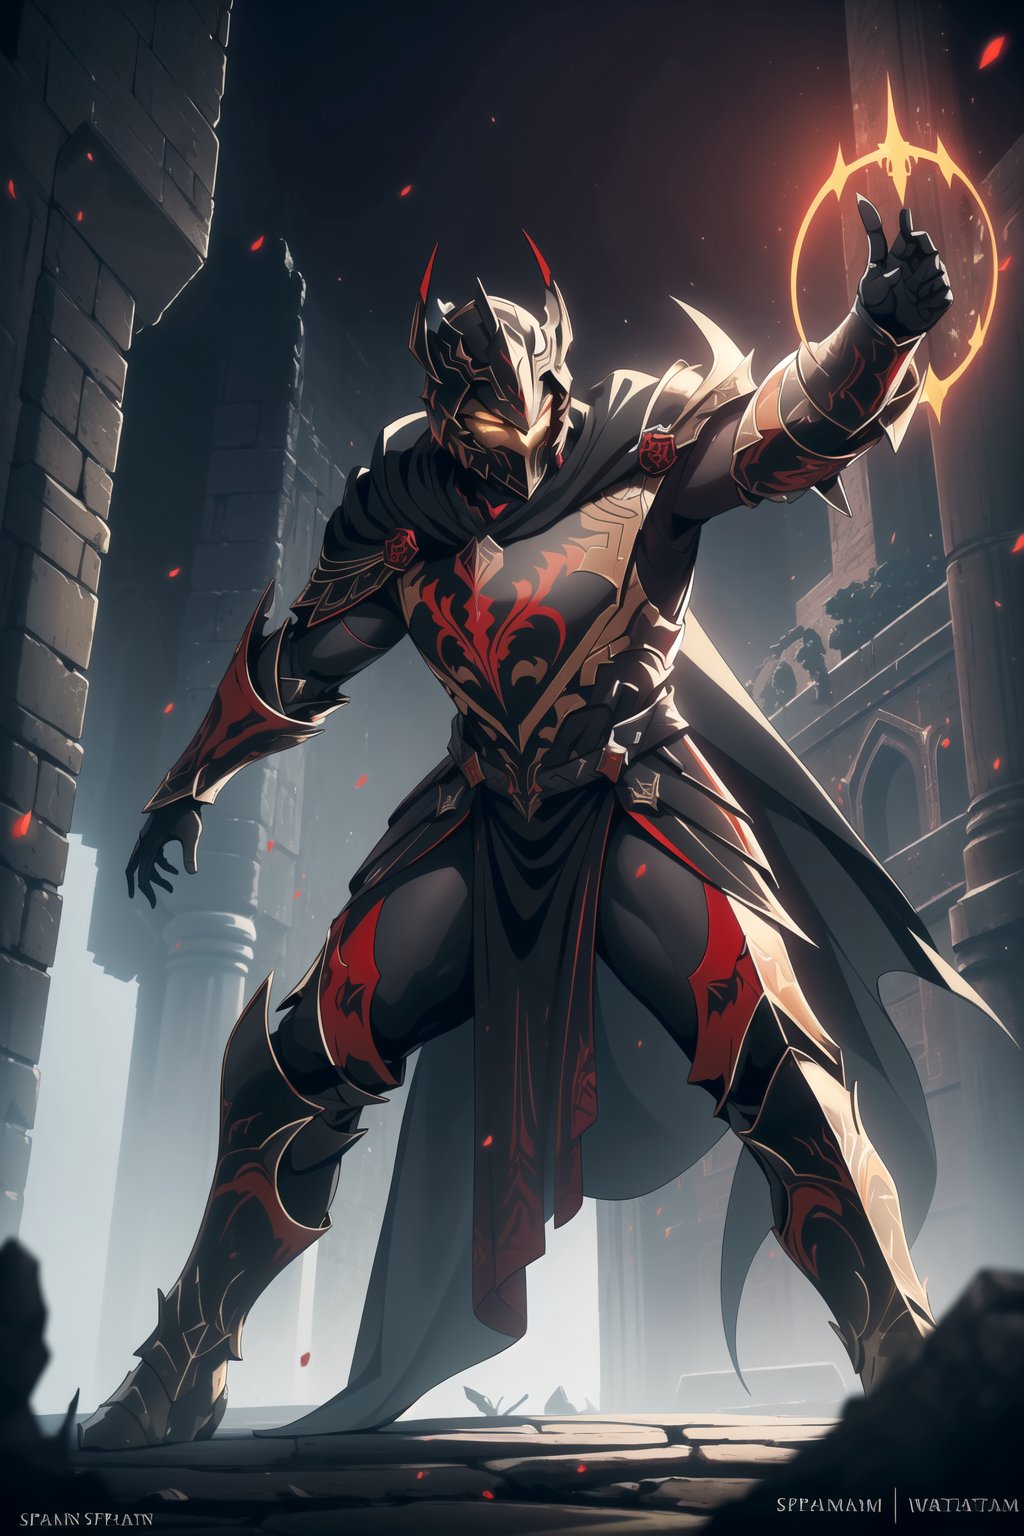 (Masterpiece, Best Quality), (Spartan Warrior in Warframe Style Armor), (Glowing Golden Eyes), (Wearing Red and Black Spartan-Themed Armor and Black Flowing Cloak:1.4), (Colloseum Arena at Noon:1.2), (Action Pose:1.4), Centered, (Half Body Shot:1.4), (From Front Shot:1.2), Insane Details, Intricate Face Detail, Intricate Hand Details, Cinematic Shot and Lighting, Realistic and Vibrant Colors, Sharp Focus, Ultra Detailed, Realistic Images, Depth of Field, Incredibly Realistic Environment and Scene, Master Composition and Cinematography, castlevania style,castlevania style,WARFRAME